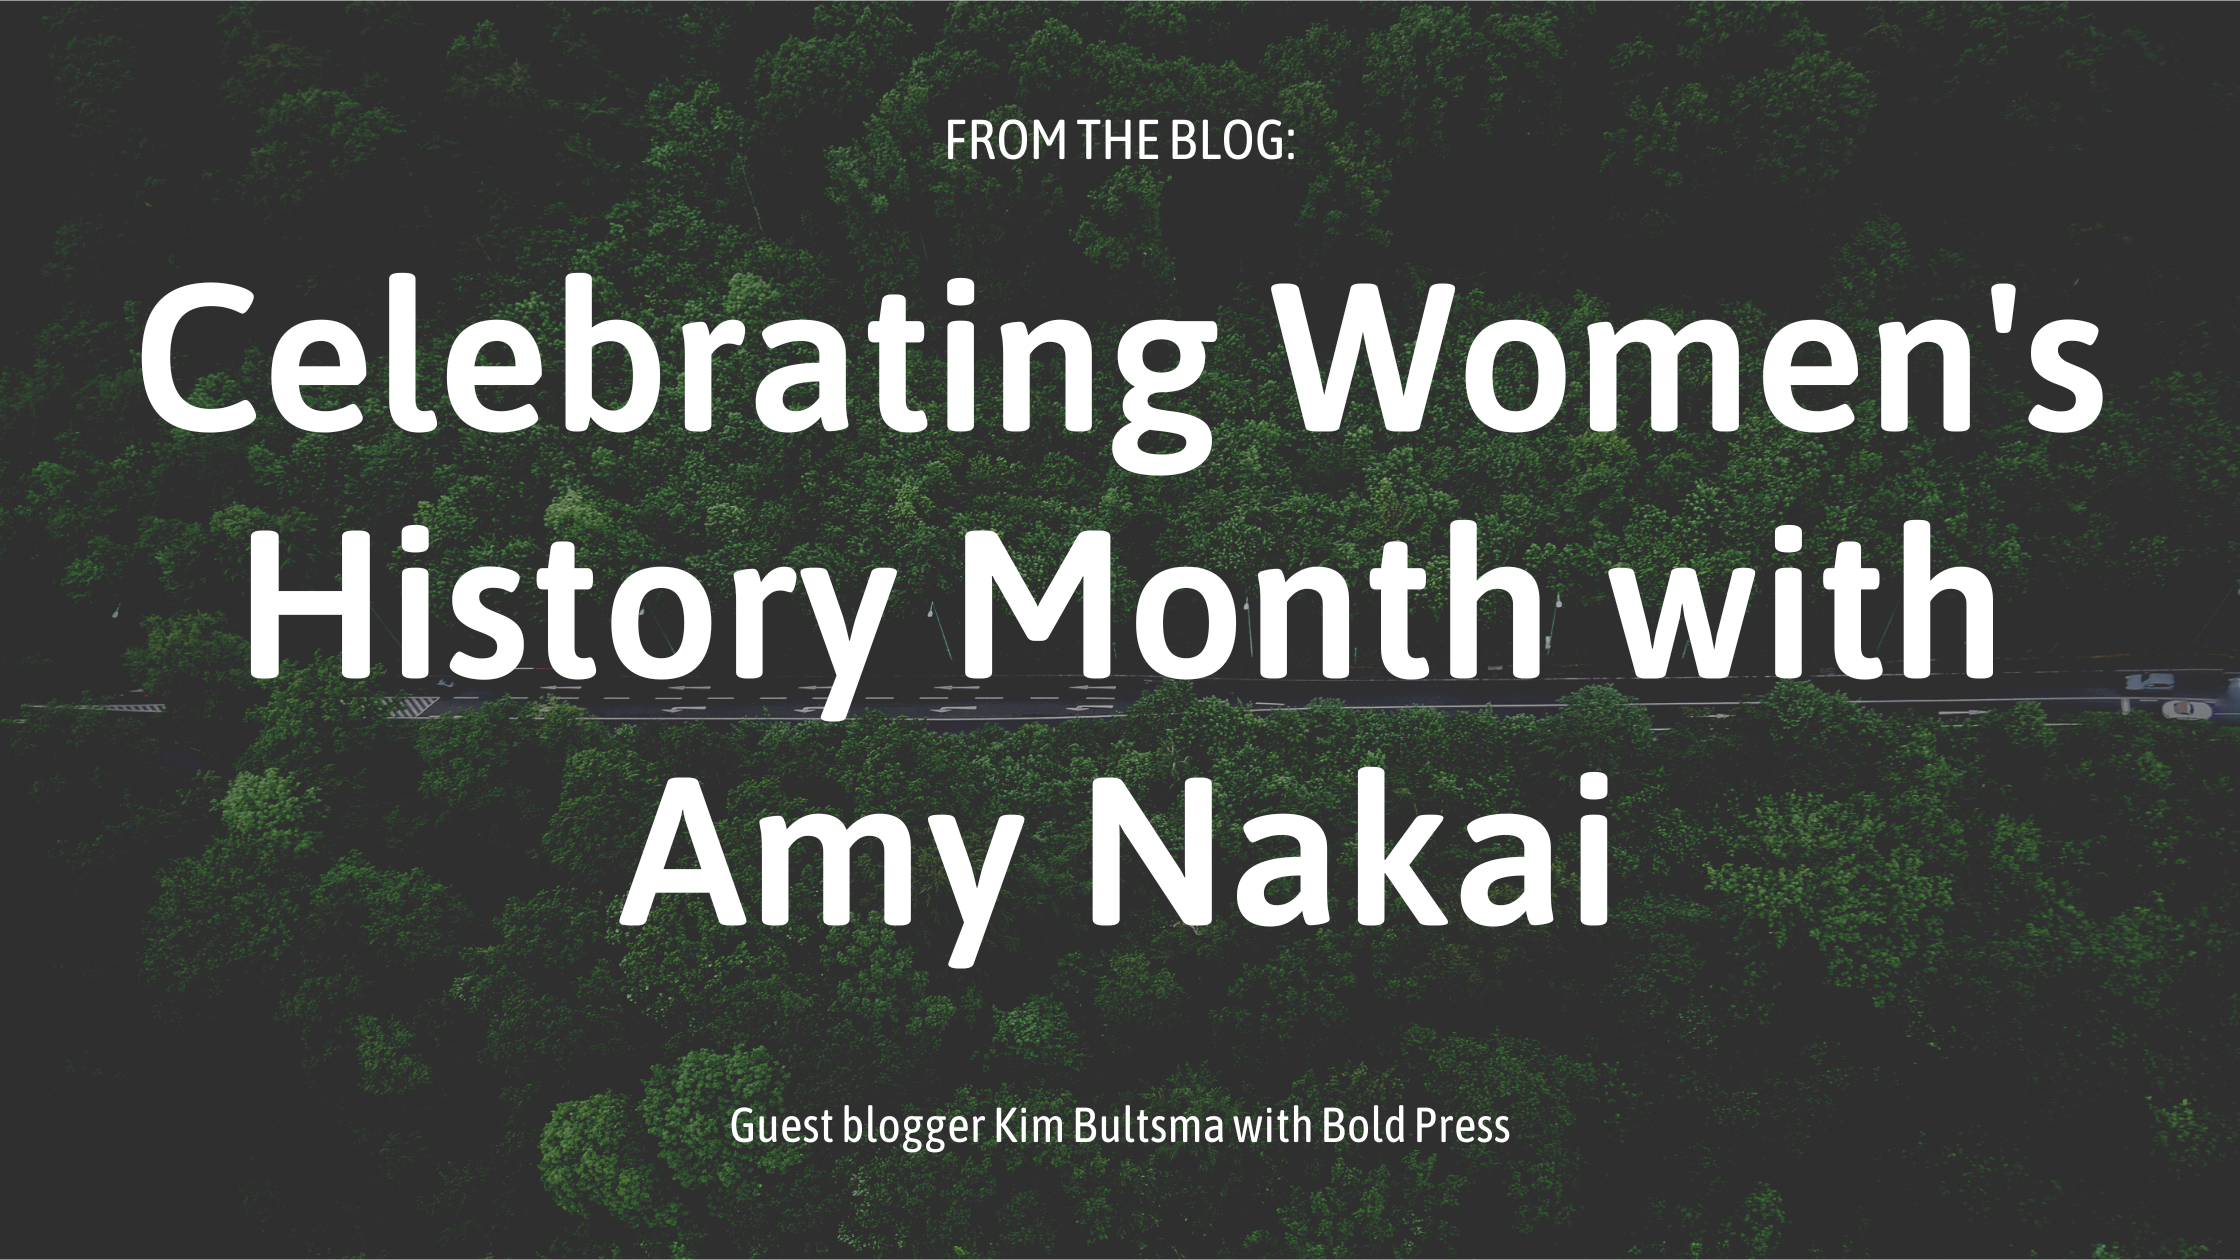 blog post photo for "celebrating women's history month with Amy Nakai"